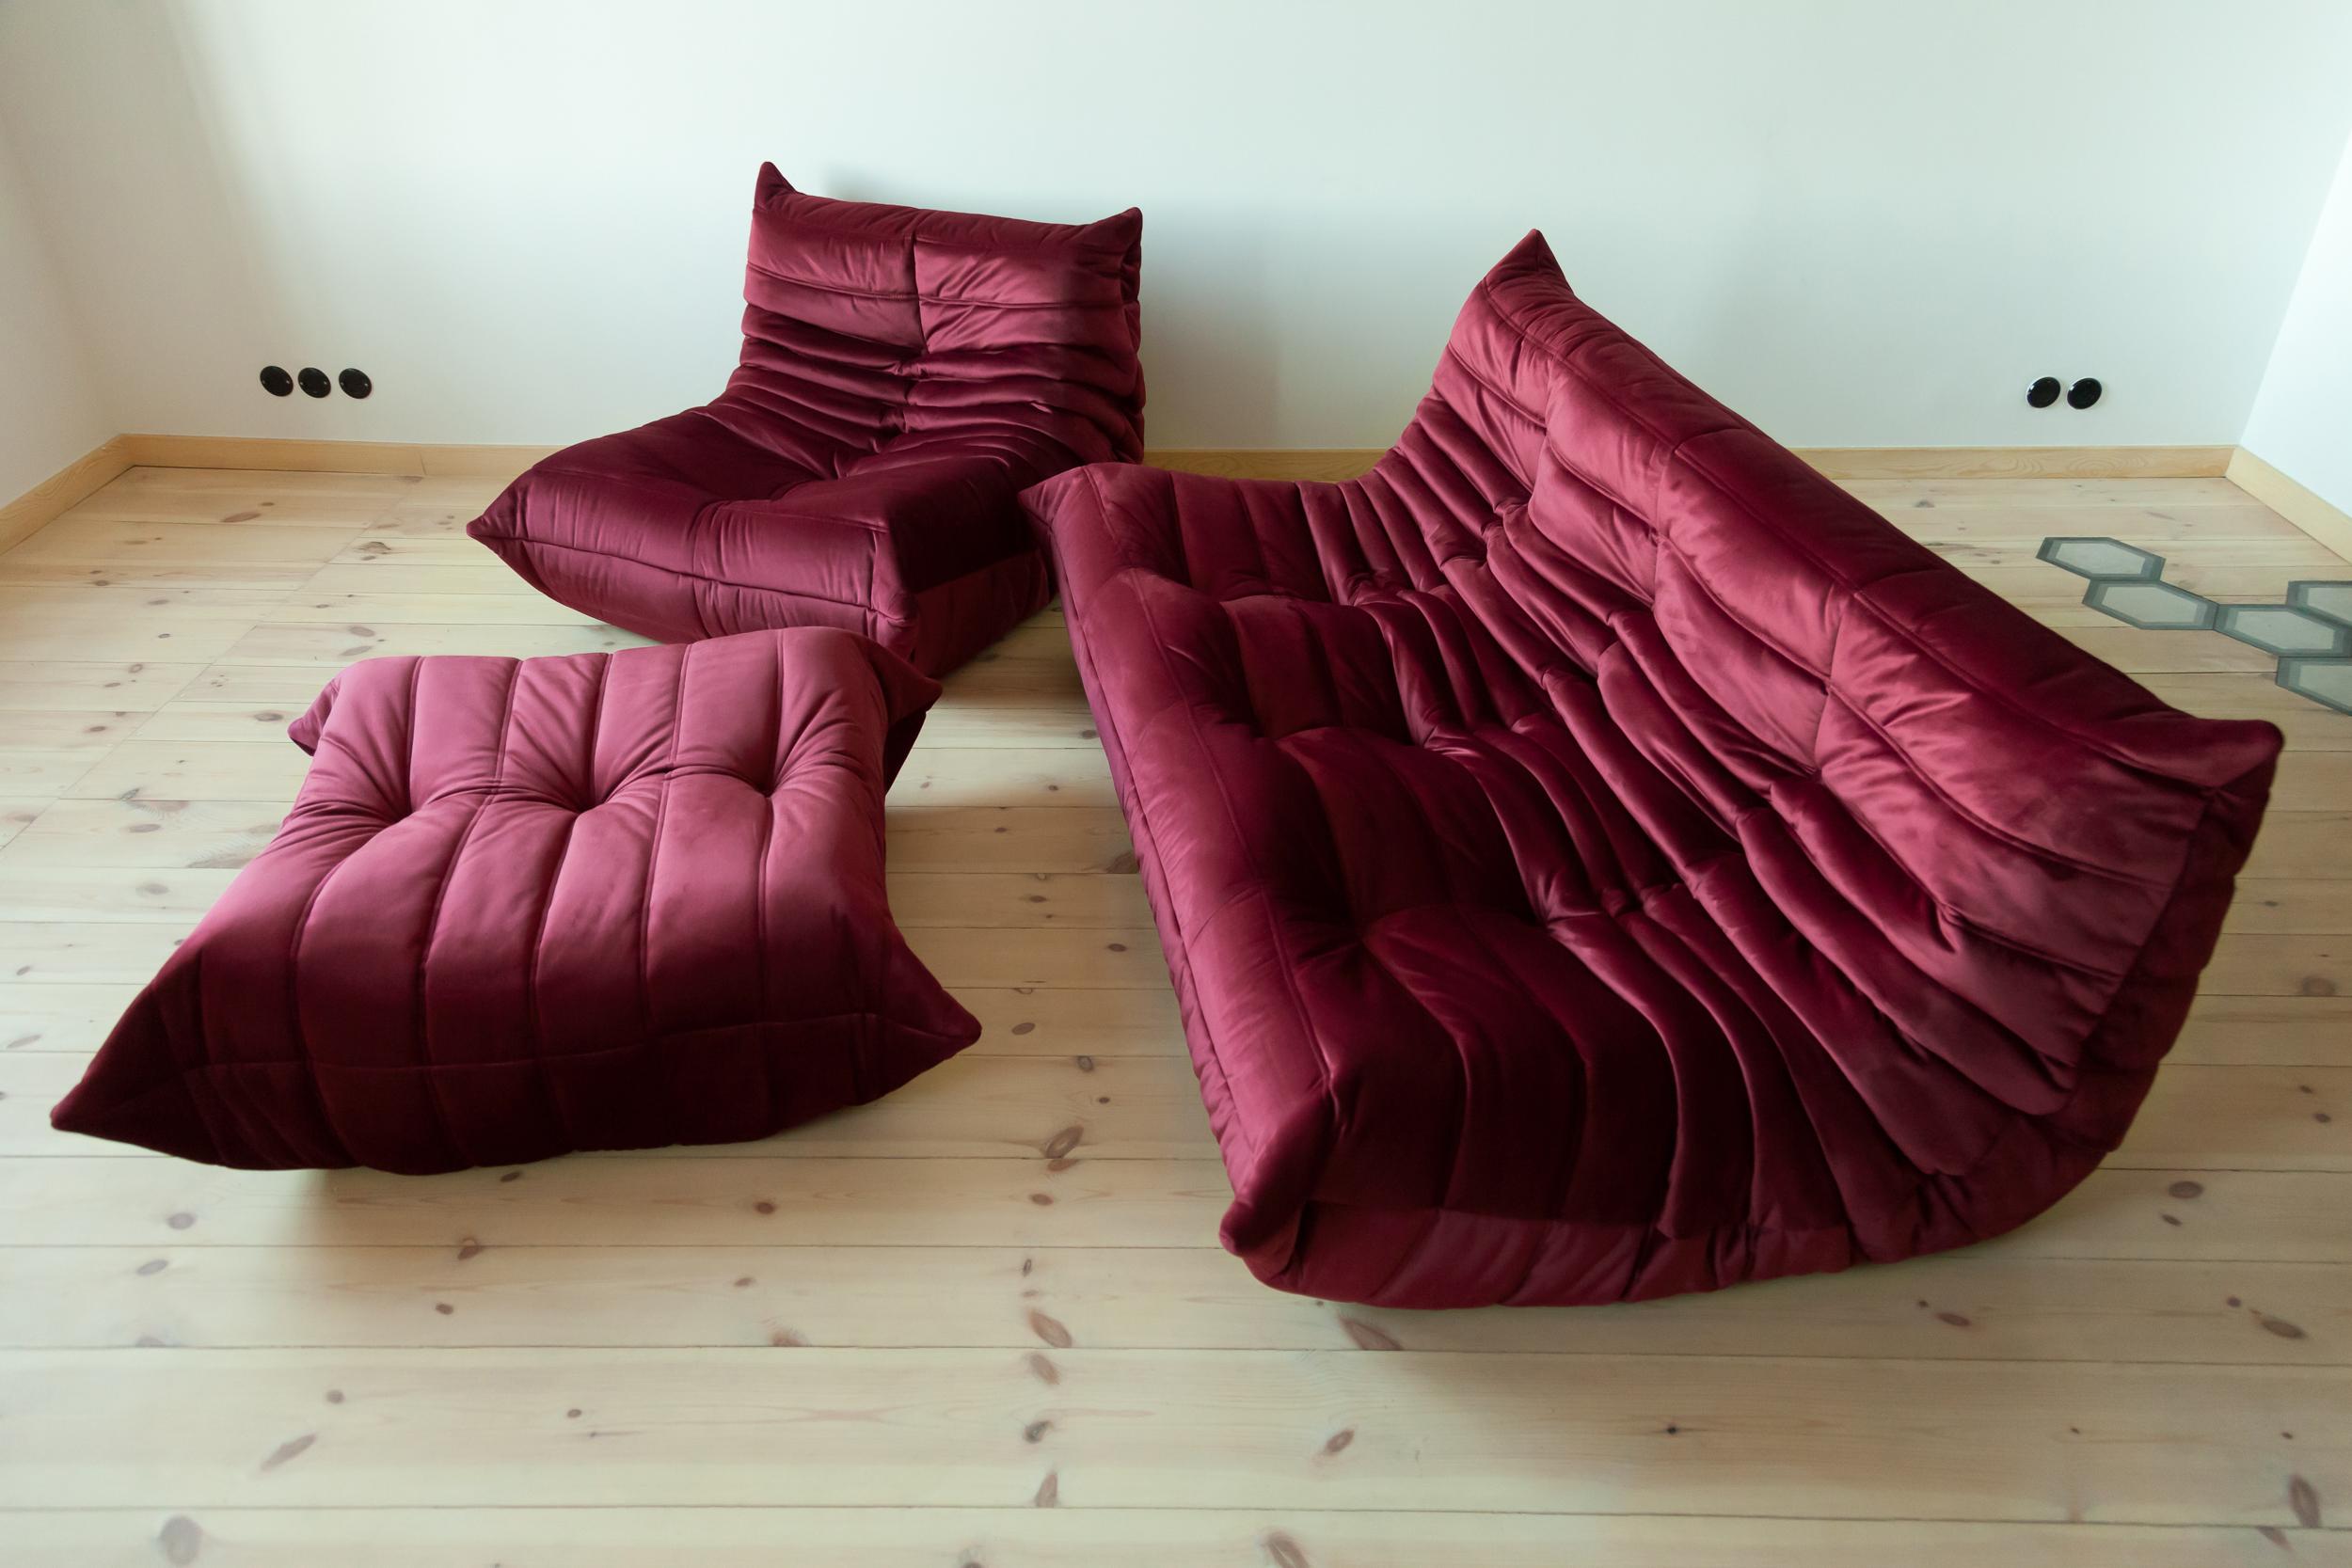 Three-piece Togo set, Design by Michel Ducaroy, manufactured by Ligne Roset this Togo living room set was designed by Michel Ducaroy in 1974 and was manufactured by Ligne Roset in France. It has been reupholstered in burgundy high quality velvet,